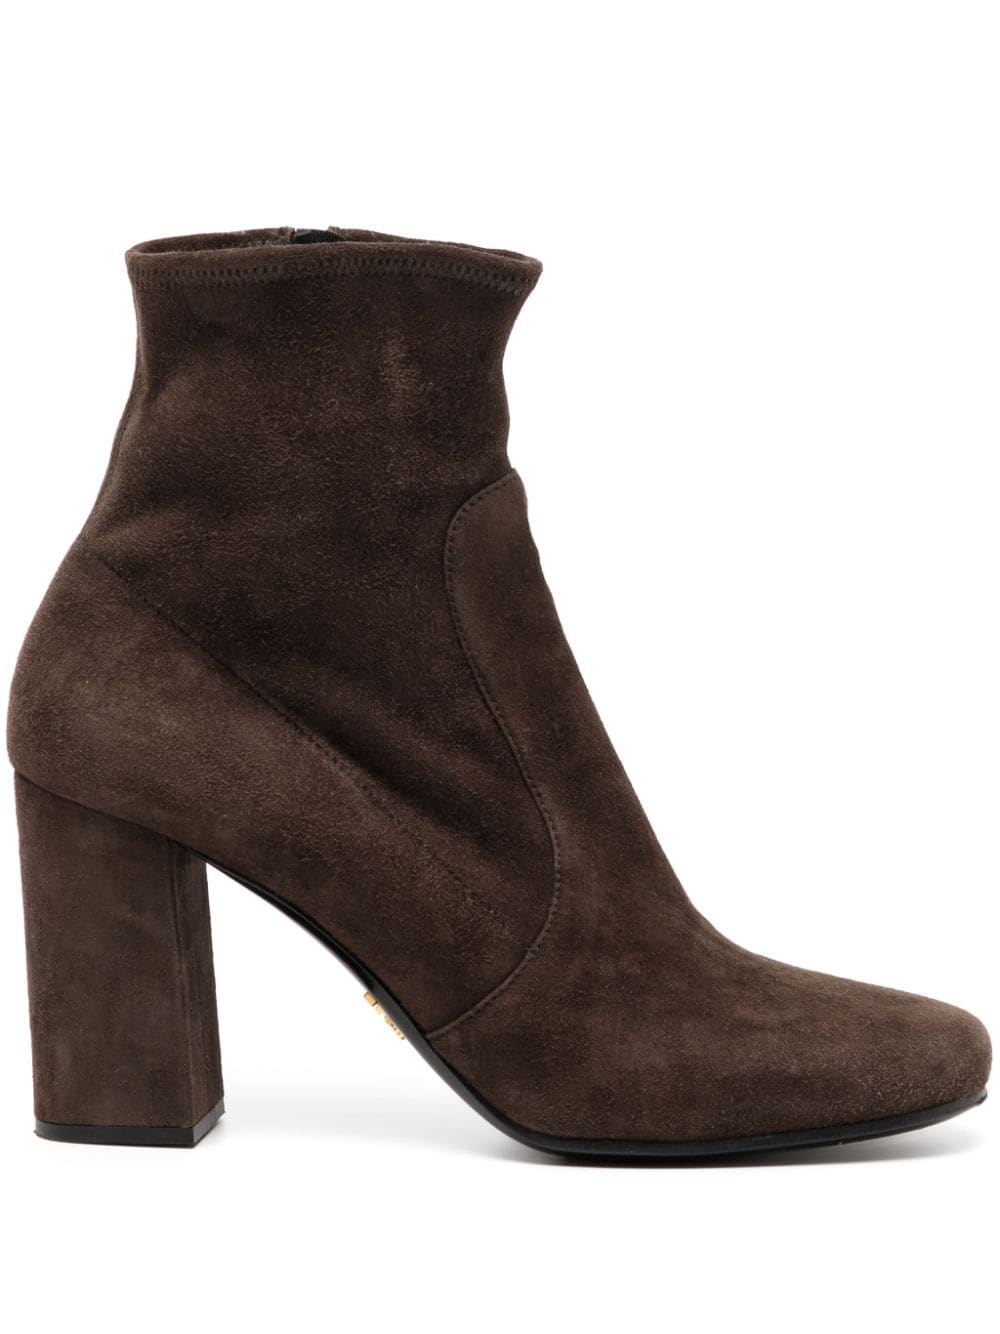 Prada Pre-Owned 85mm suede ankle boots - Brown